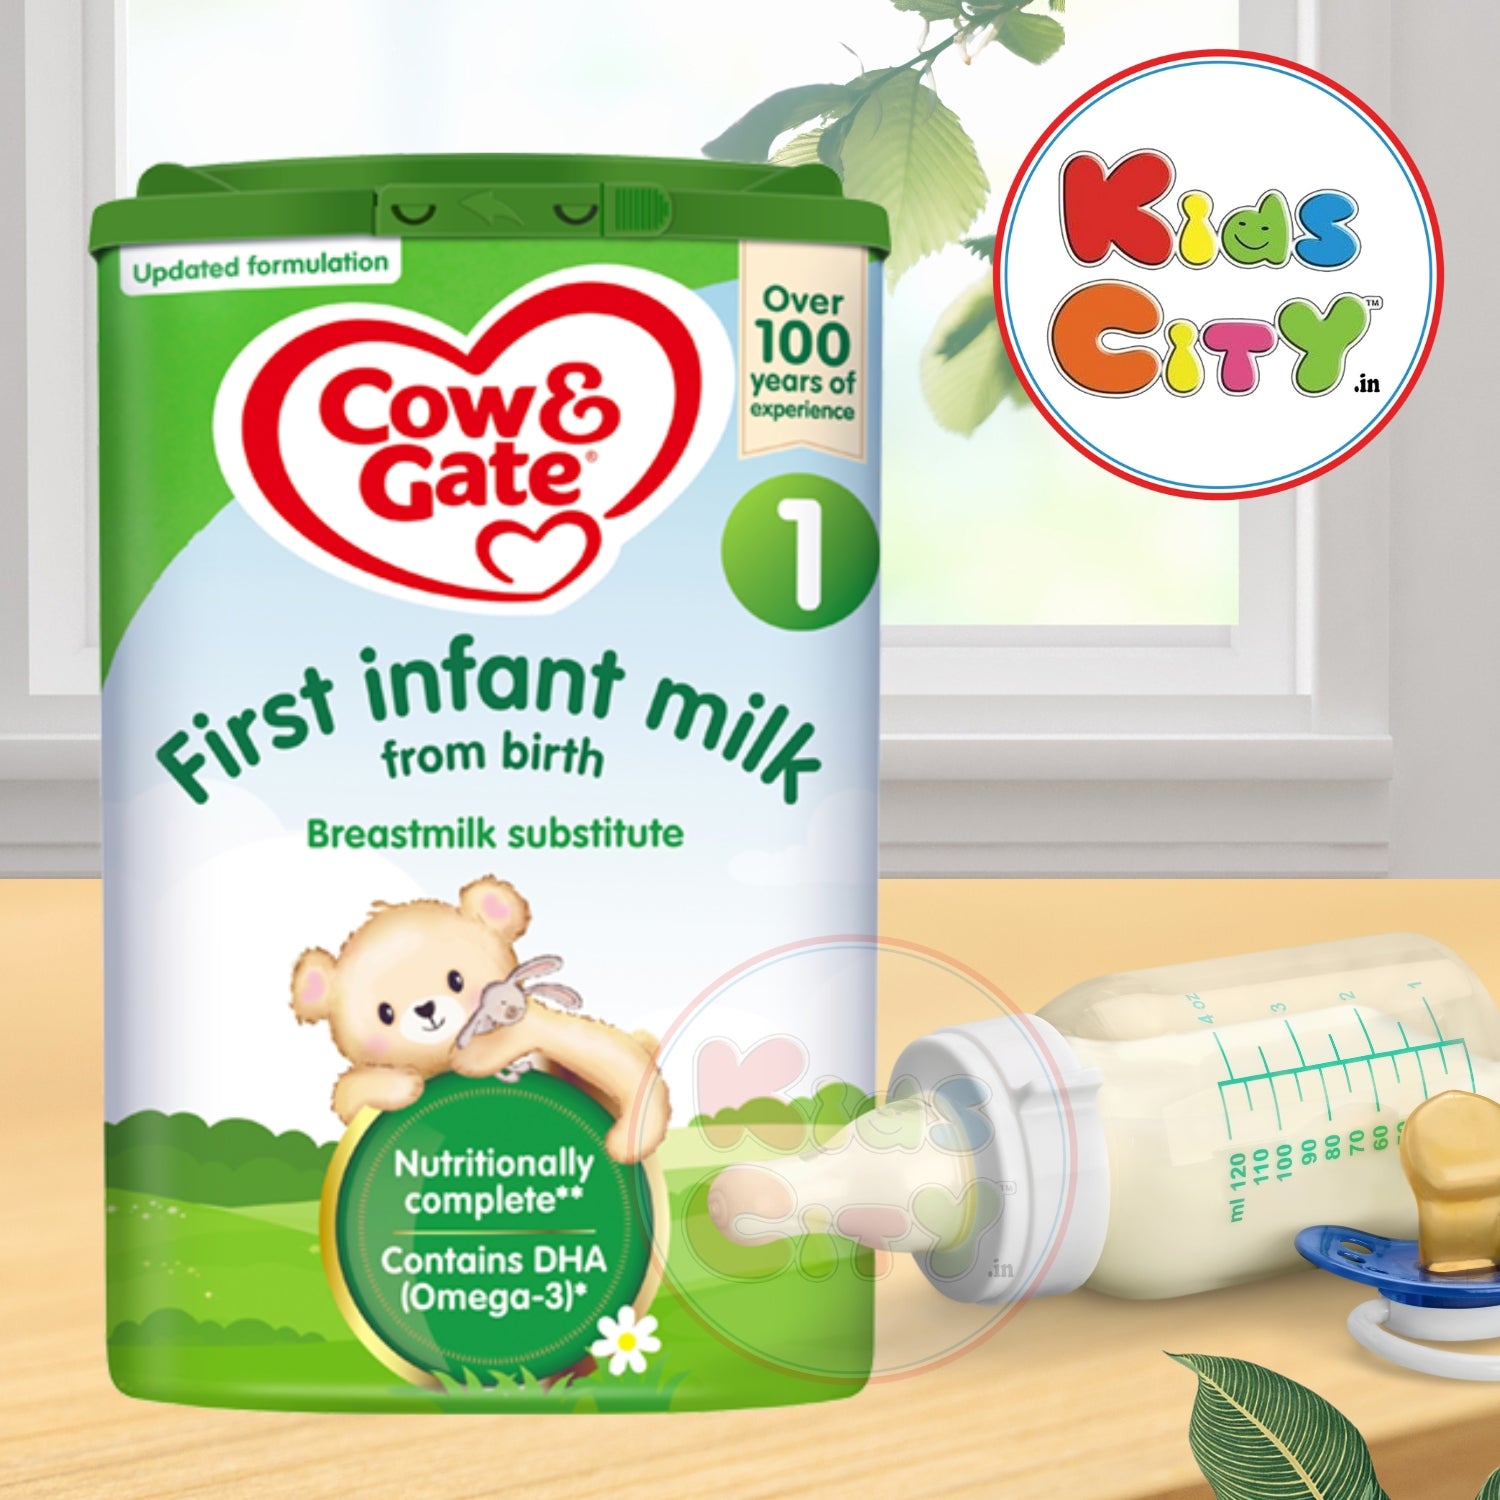 Cow & Gate First Infant Milk, Stage 1 - 800g